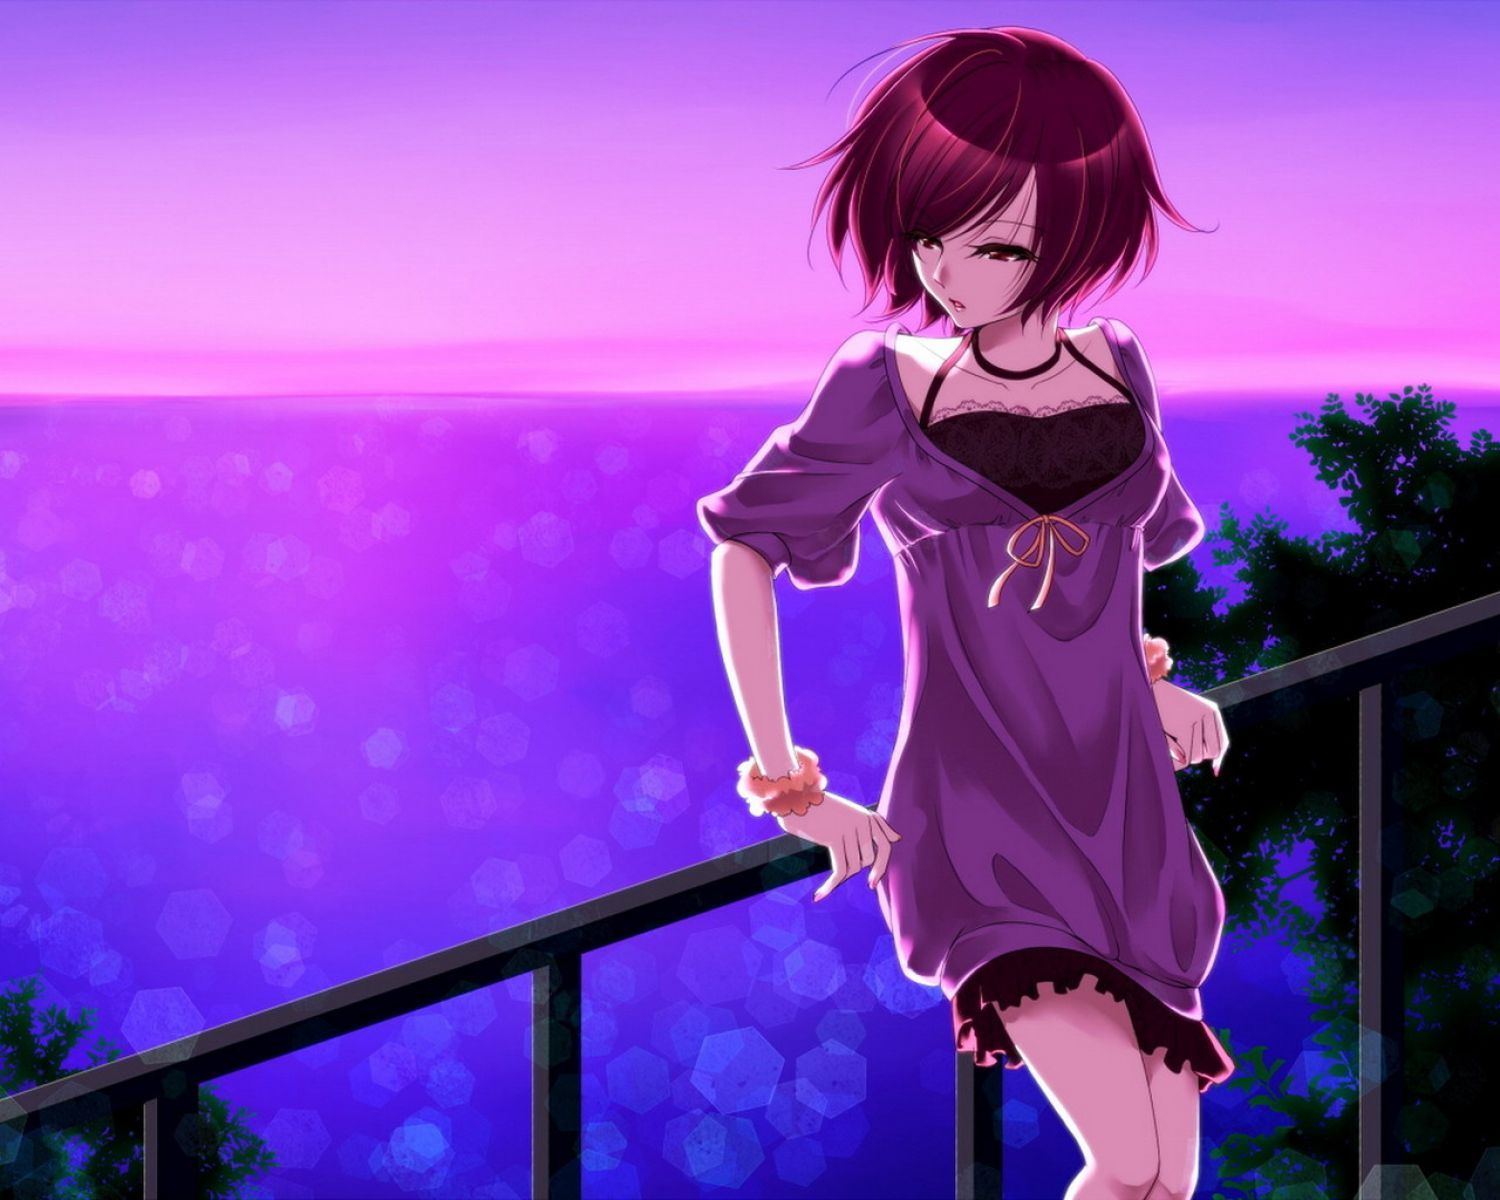 Beautiful Girl Alone. HD Anime Wallpaper for Mobile and Desktop